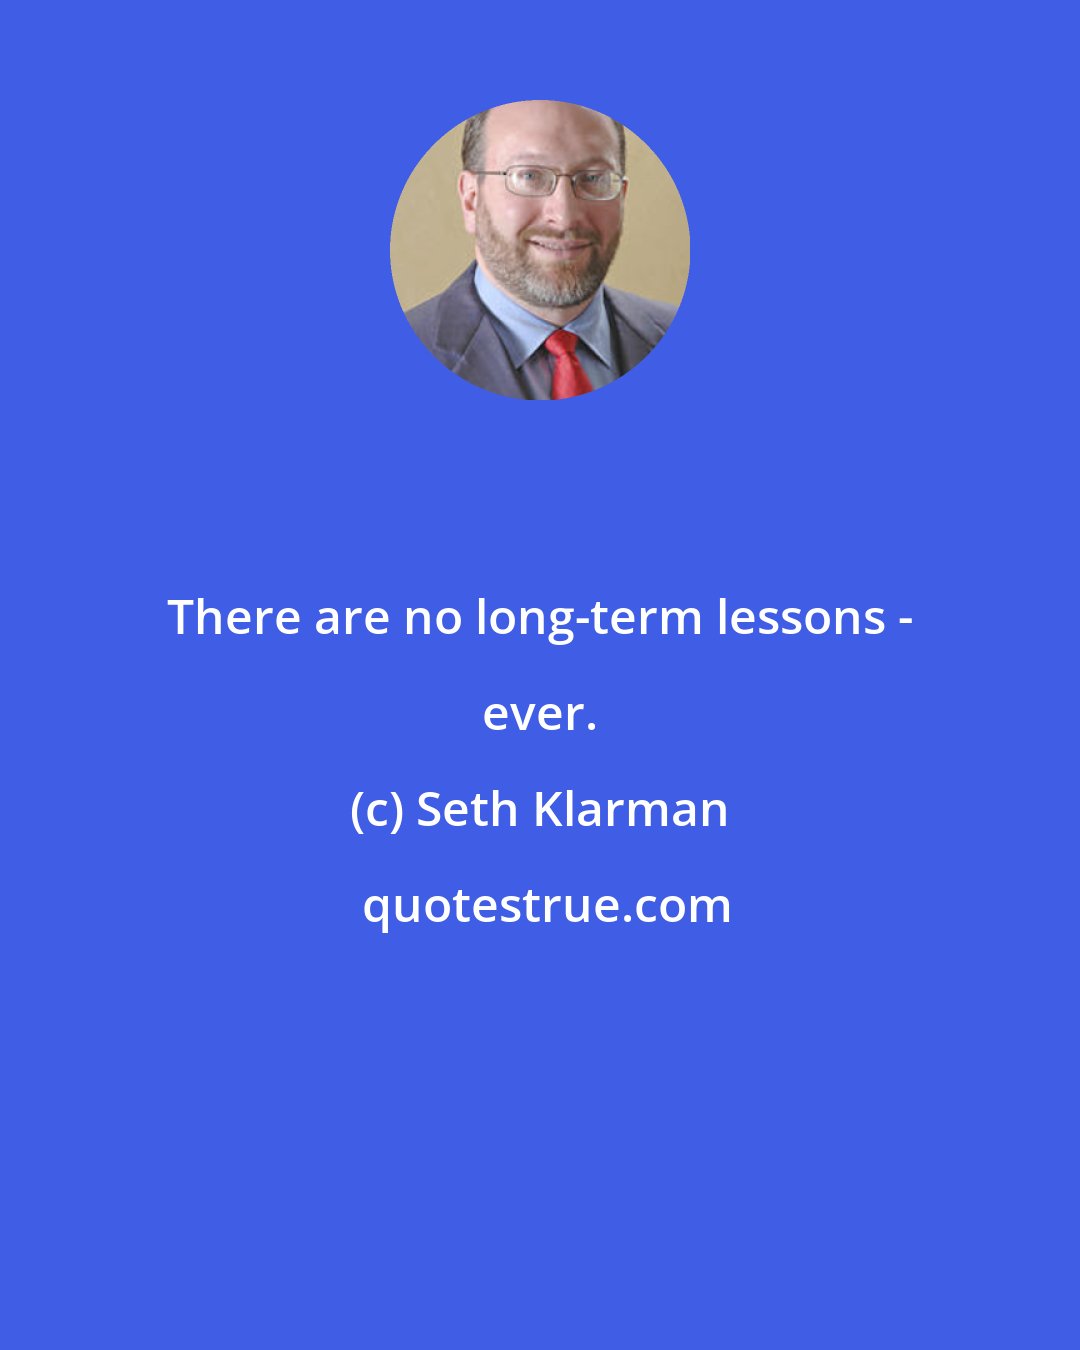 Seth Klarman: There are no long-term lessons - ever.